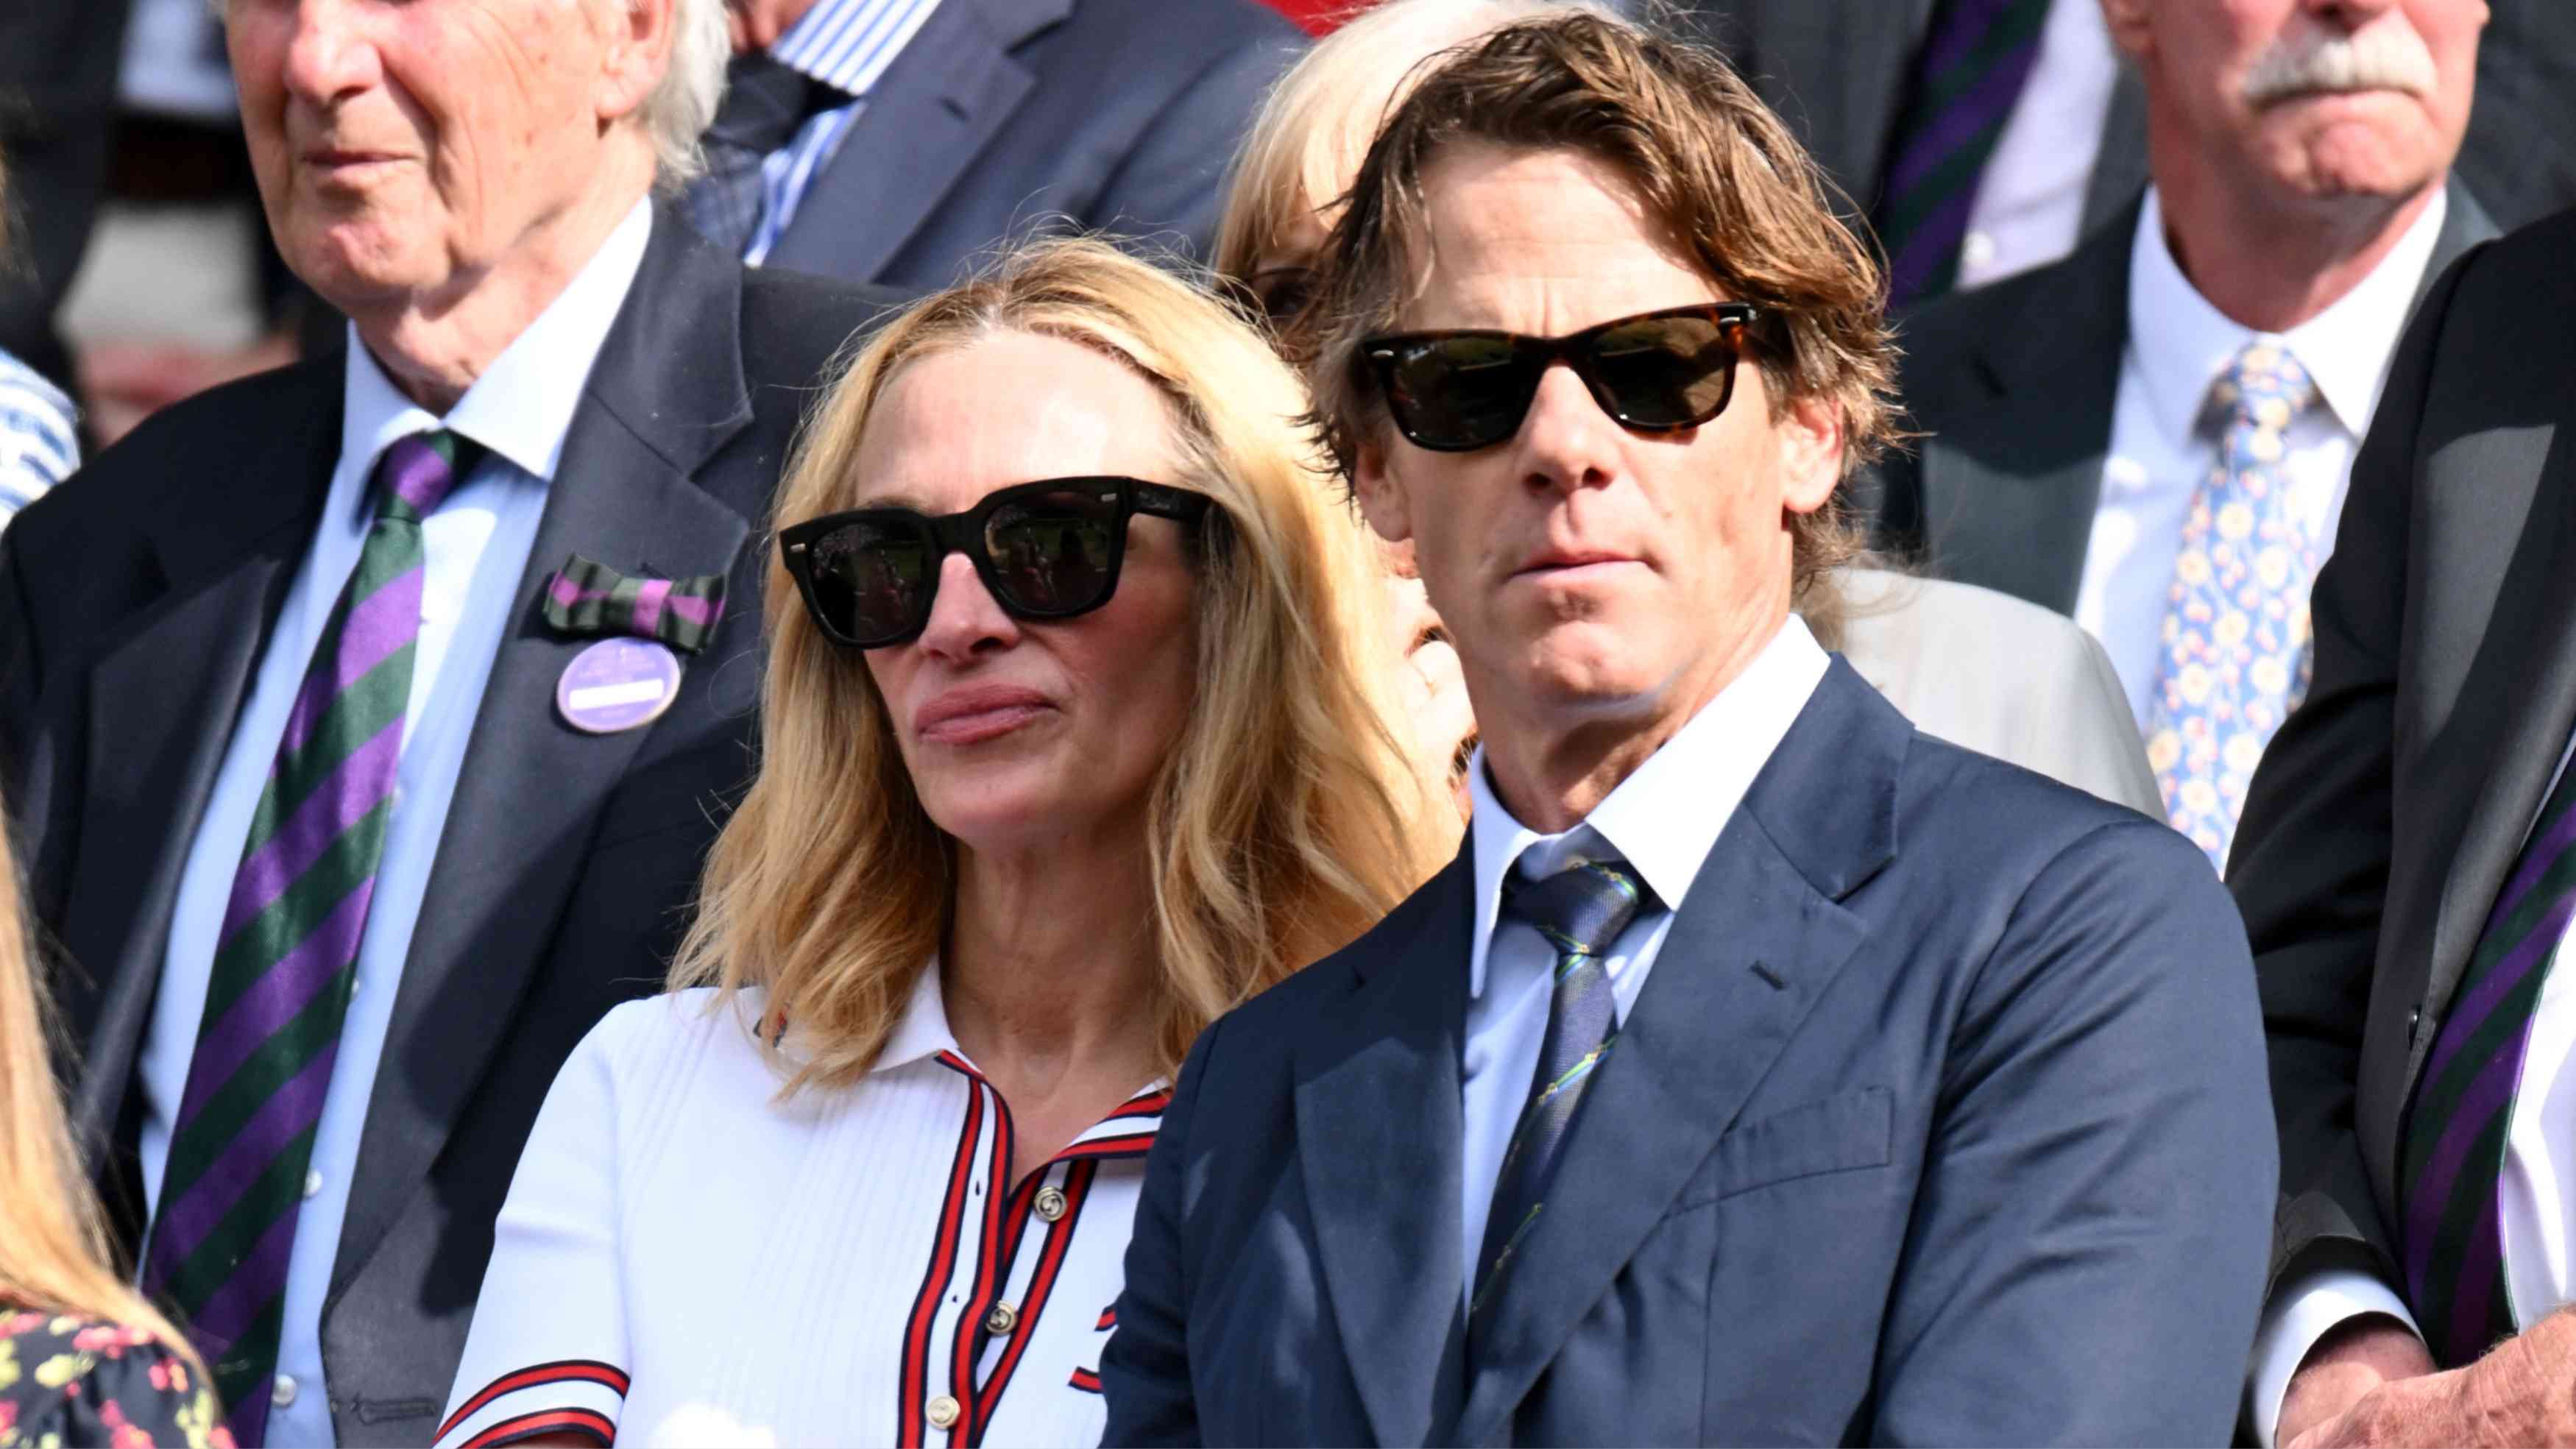 Julia Roberts Wore a Gucci Tennis Dress for a Rare Couple's Outing With Husband Danny Moder at Wimbledon